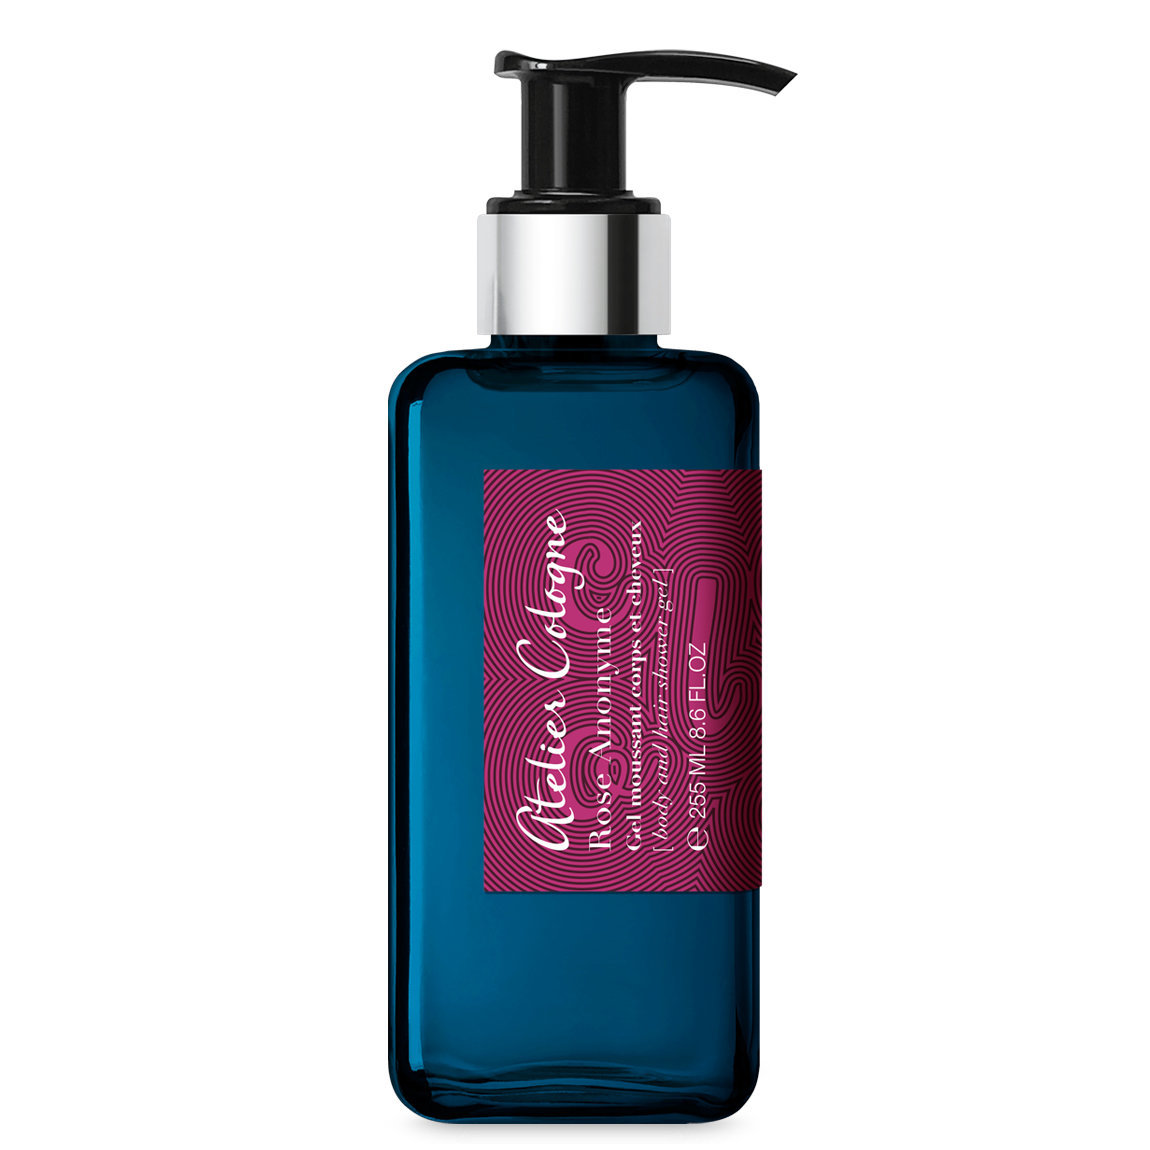 Atelier Cologne Rose Anonyme Body & Hair Shower Gel alternative view 1 - product swatch.